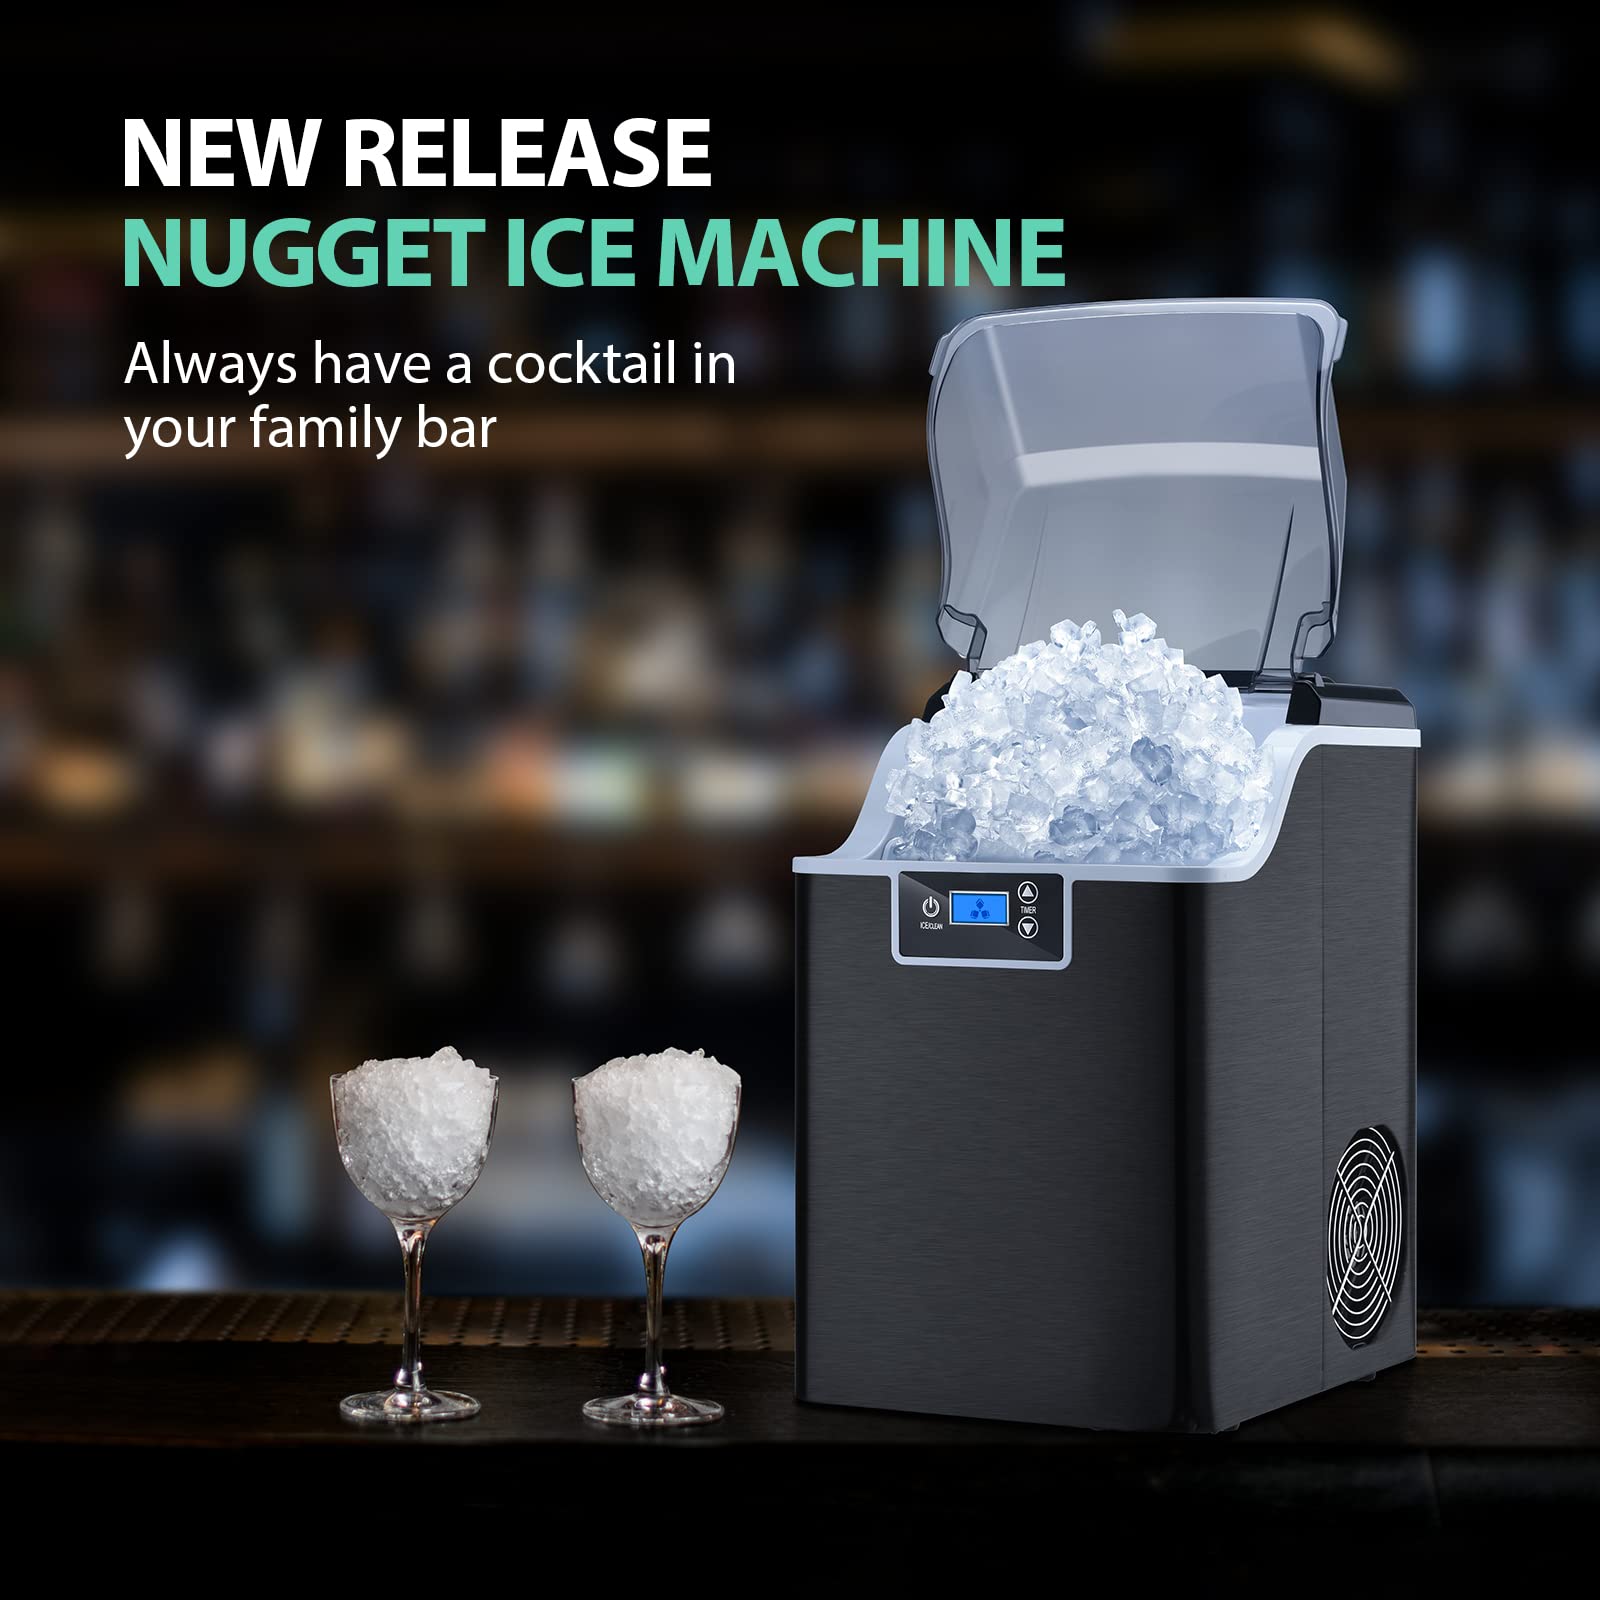 Nugget Ice Maker Countertop, FREE VILLAGE 44Lbs/24H Portable Ice Maker for Soft & Chewable Nugget Pellet Ice, Self-Cleaning & Quiet, Ice Machine with Ice Scoop and Basket for Home Office Bar Party